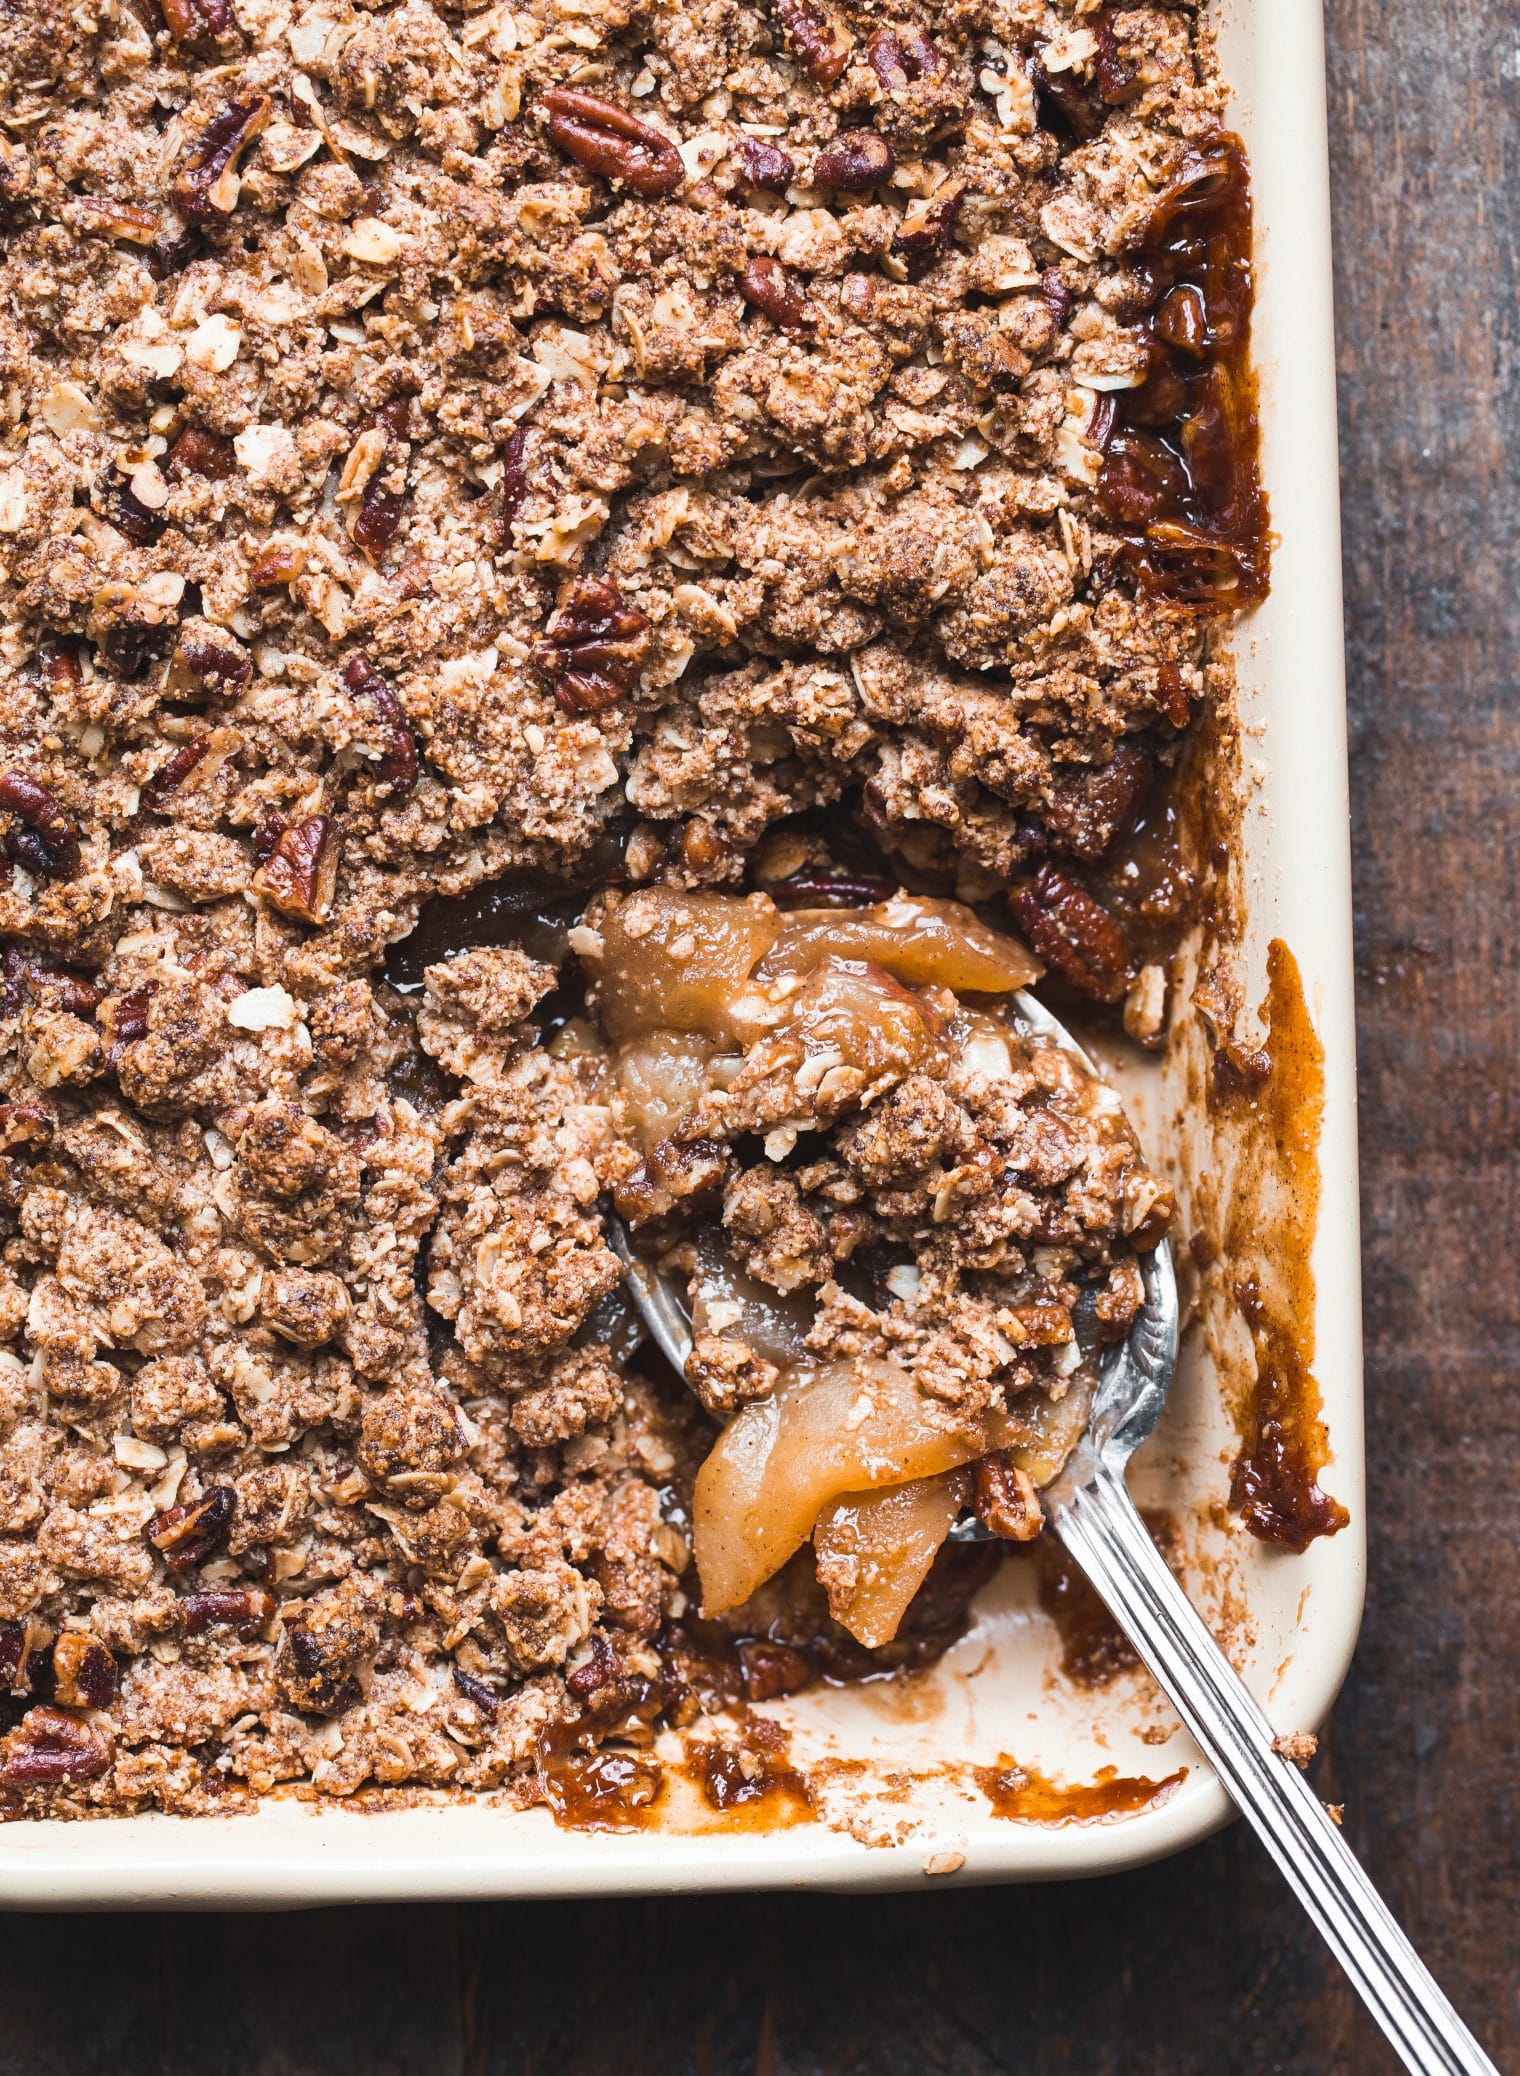 This Gluten-Free Vegan Apple Crisp will make you want seconds! With a luscious caramel apple filling and oatmeal crumble topping, this vegan holiday dessert is irresistible.